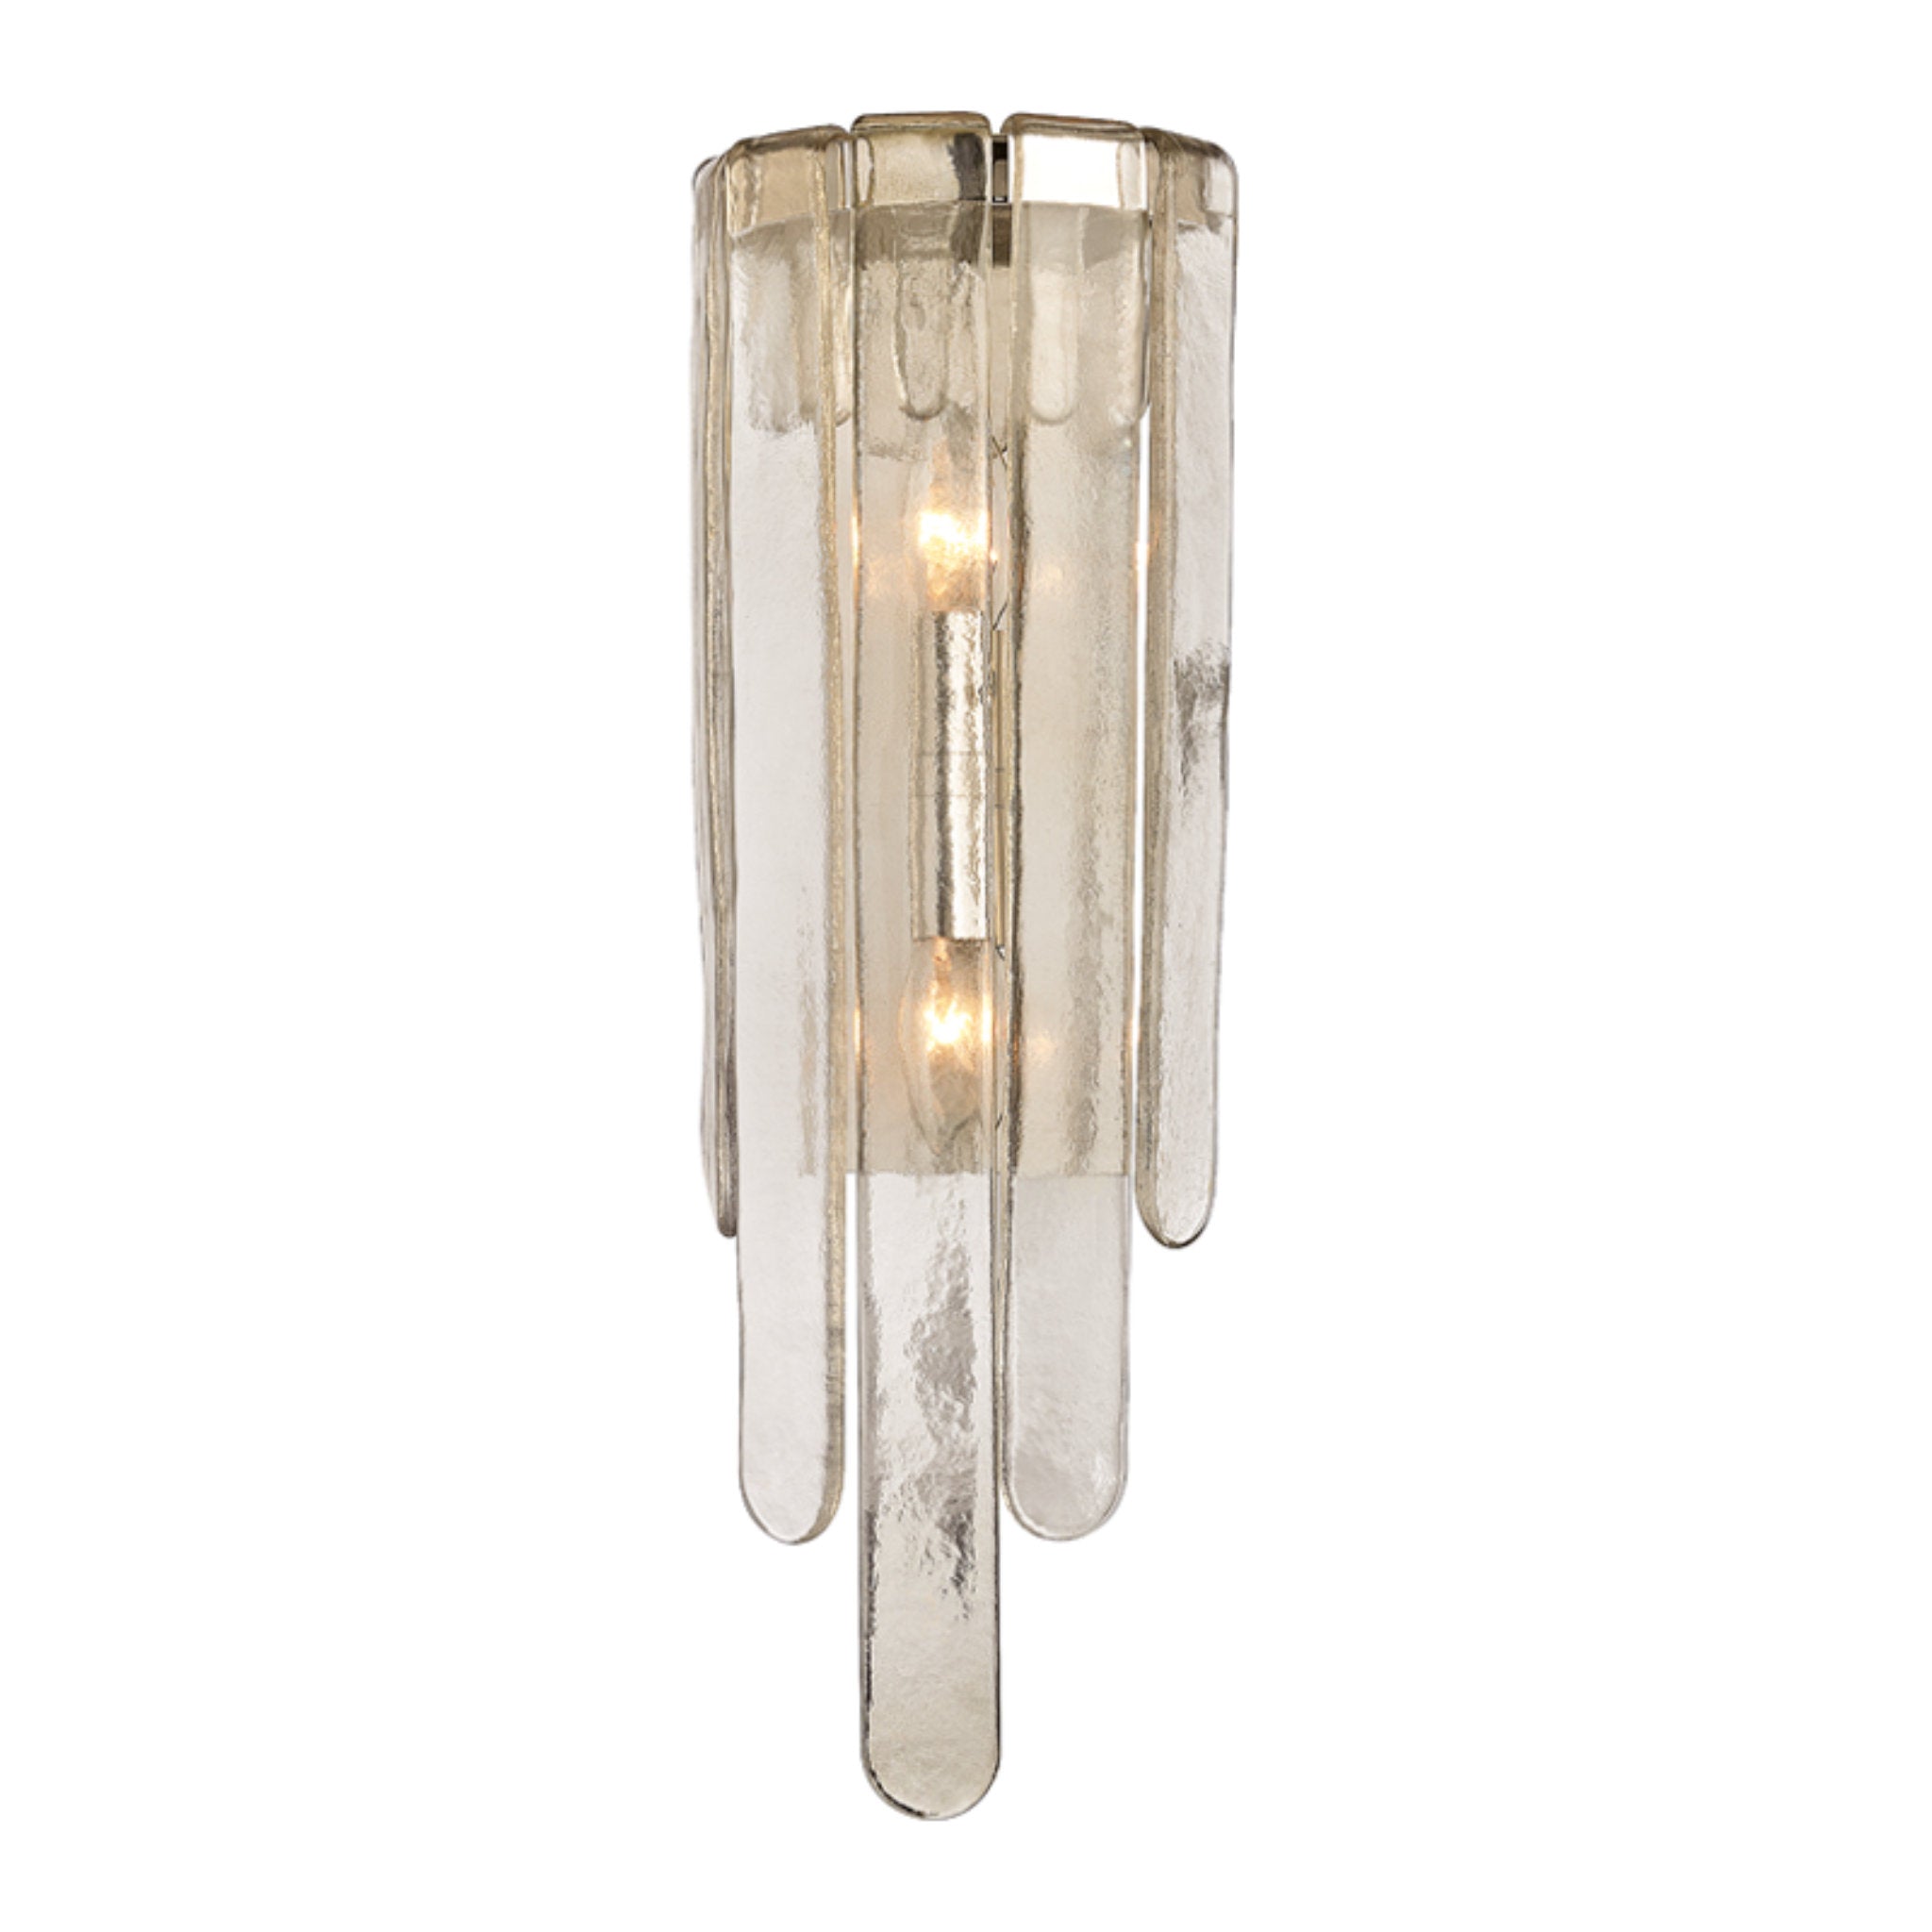 Fenwater 2 Light Wall Sconce in Polished Nickel